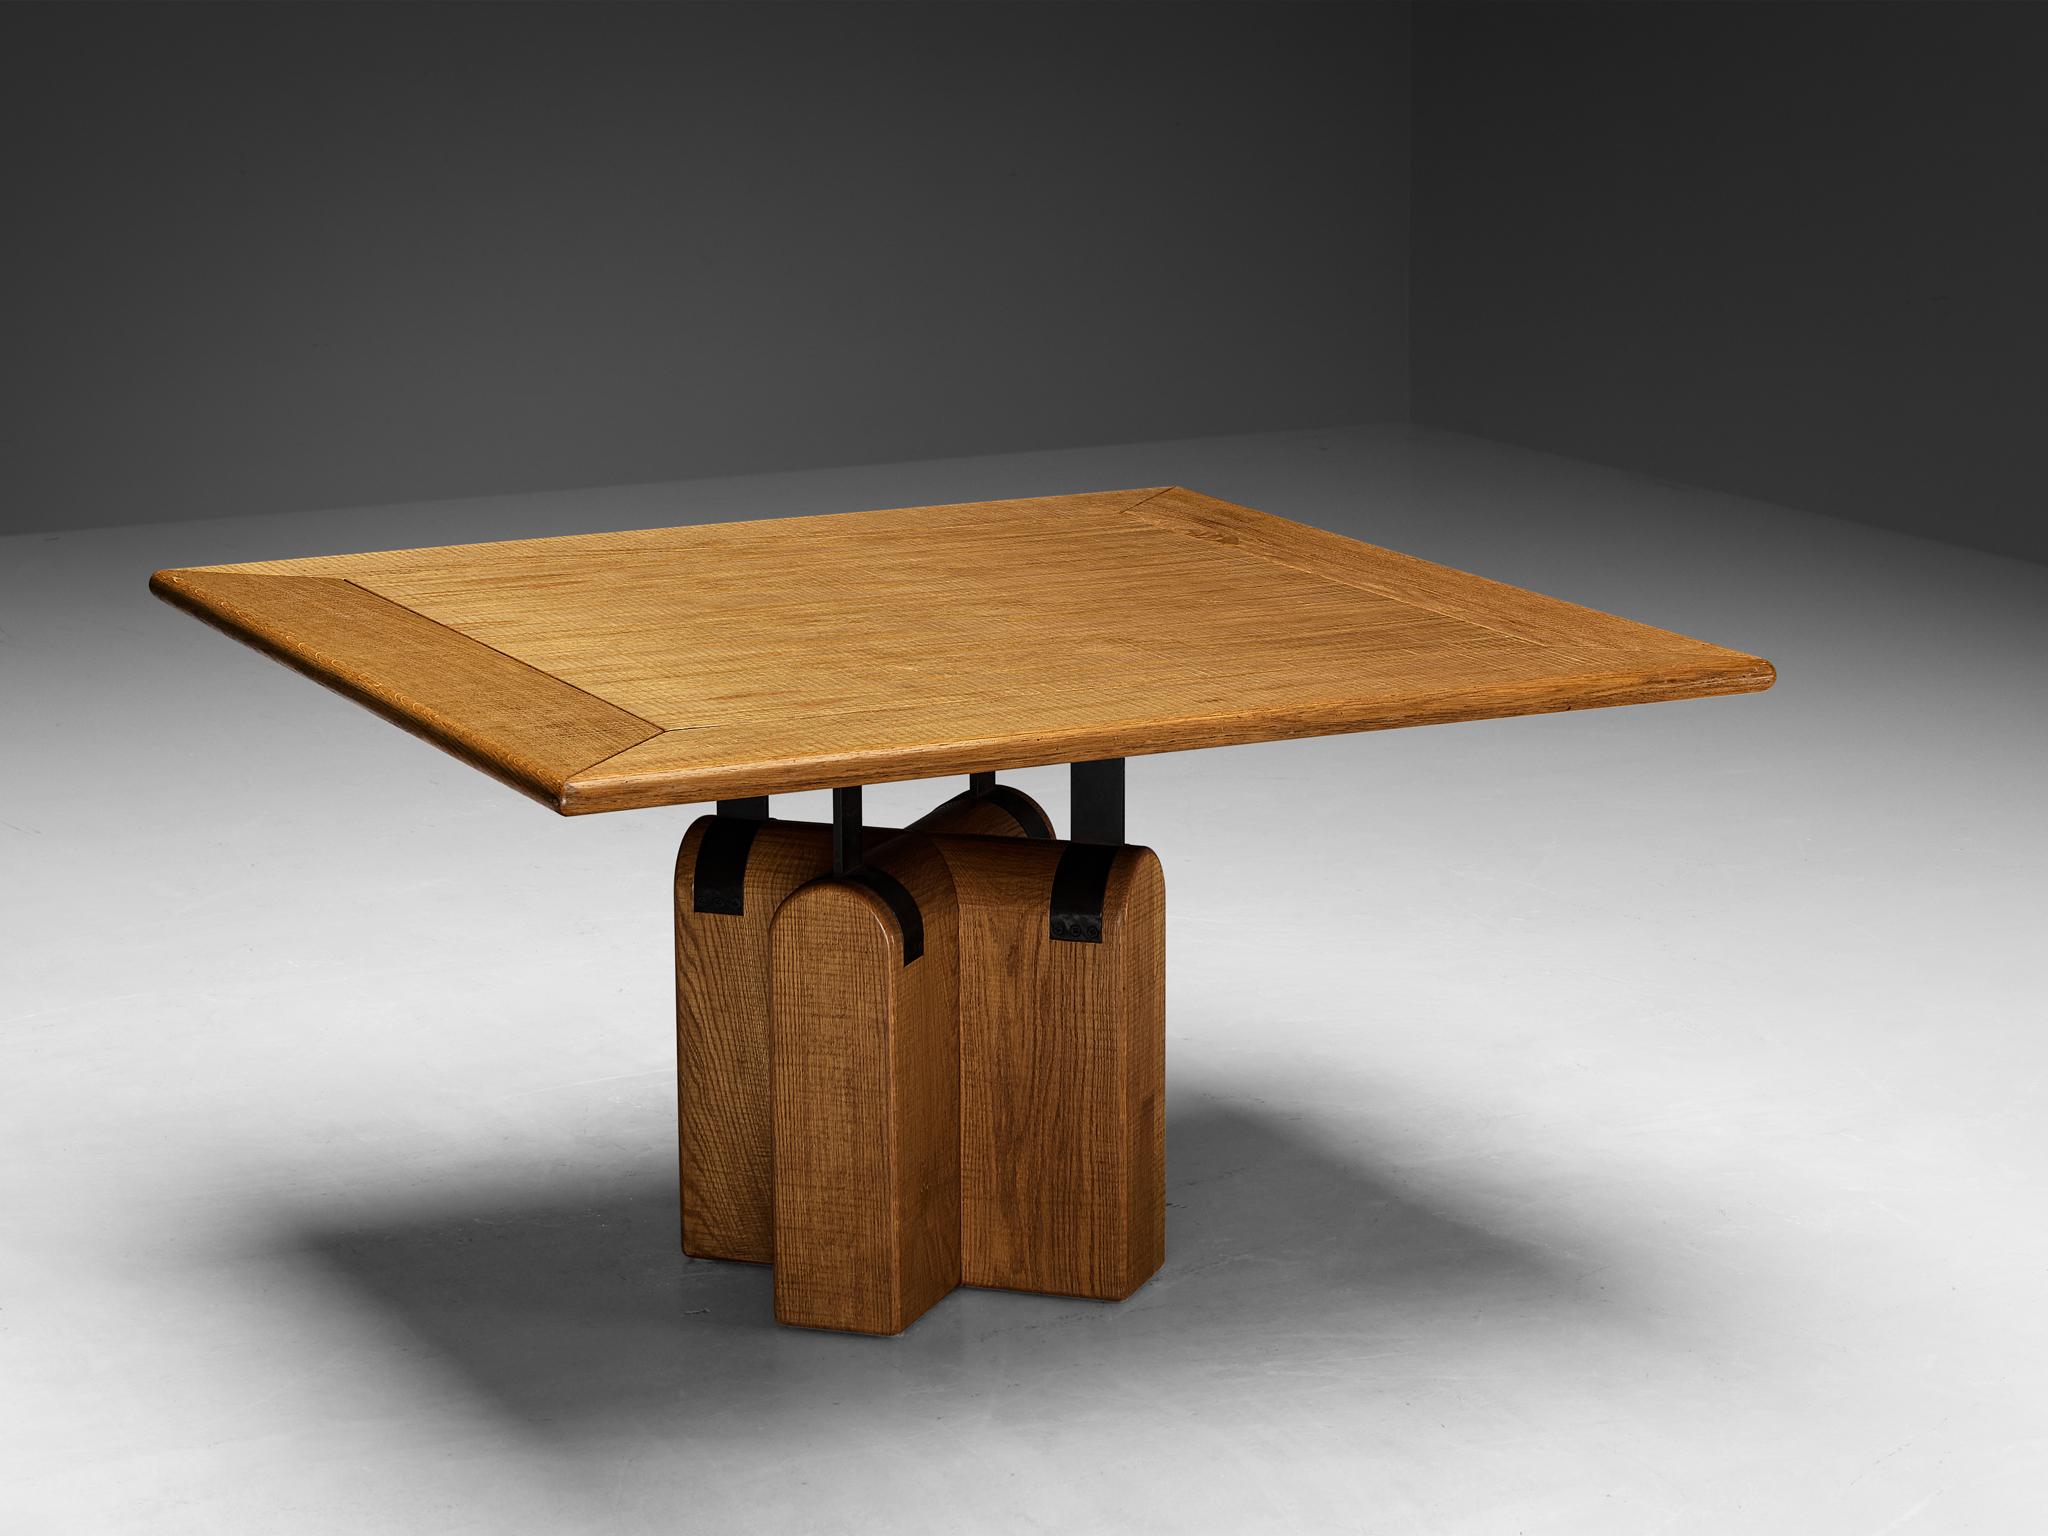 Giuseppe Rivadossi for Officina Rivadossi, dining table, oak, iron, Italy, 1970s

Once more, Giuseppe Rivadossi demonstrates his remarkable ability to embody material and technical expertise through this table, setting a prime example. The